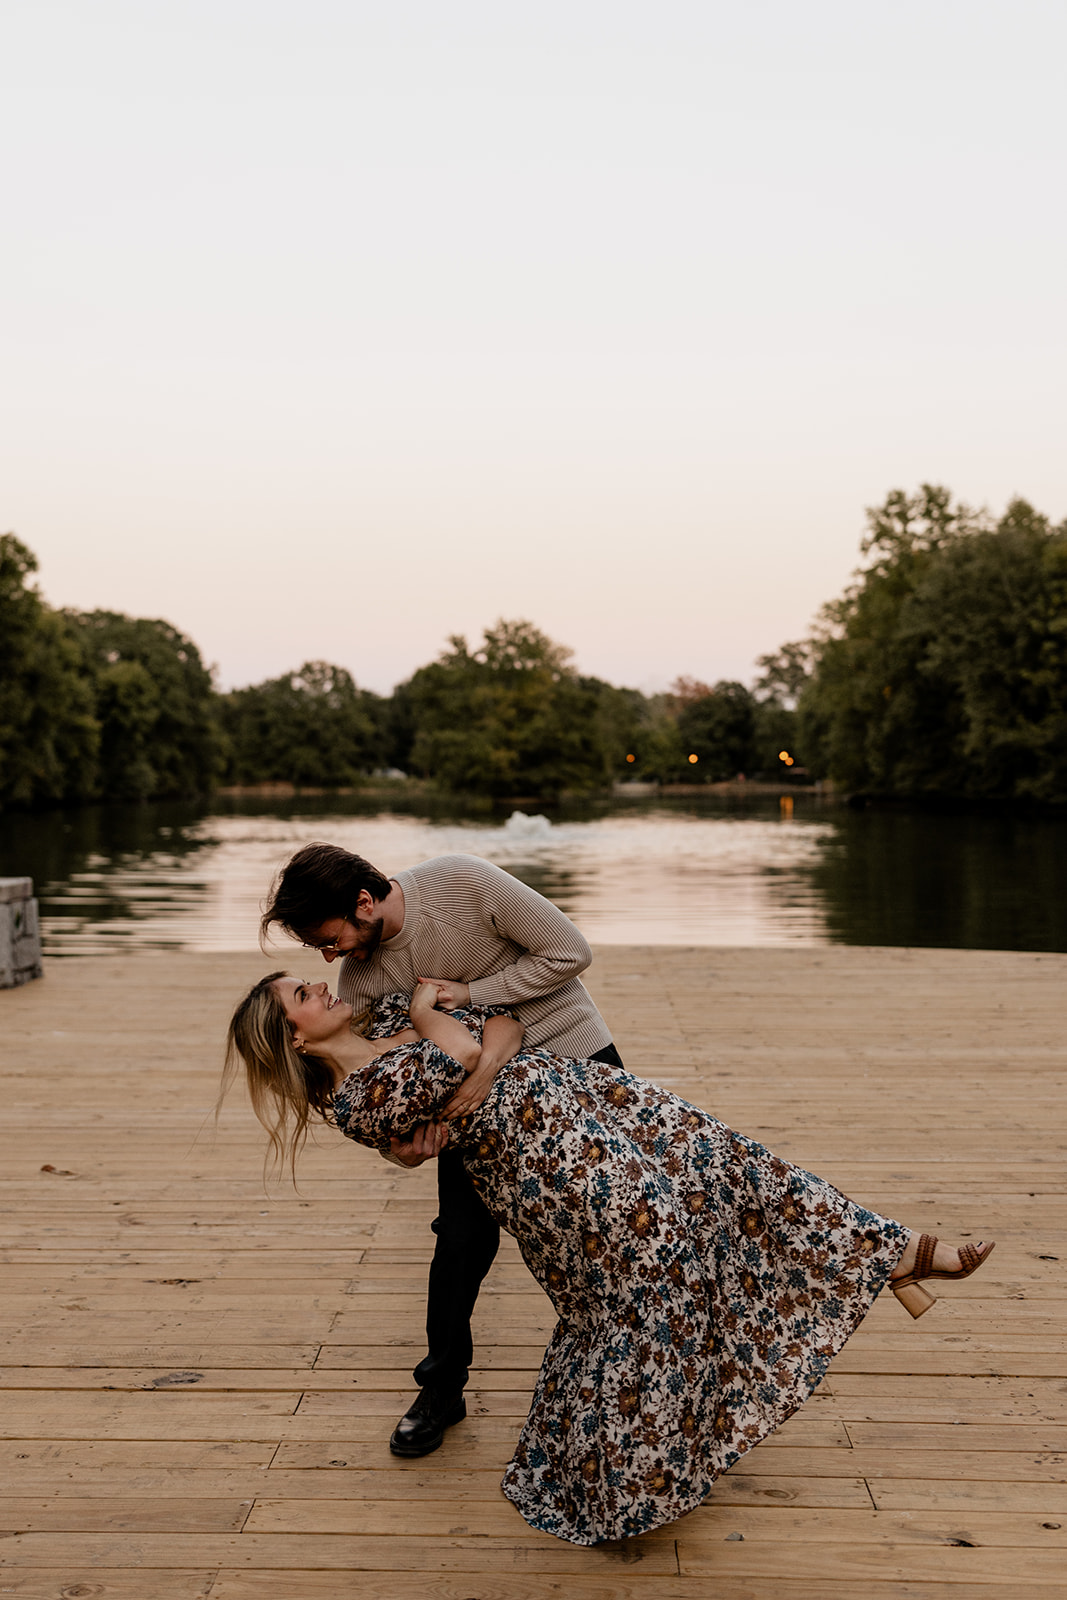 Piedmont Park's serene beauty provides the perfect backdrop for love